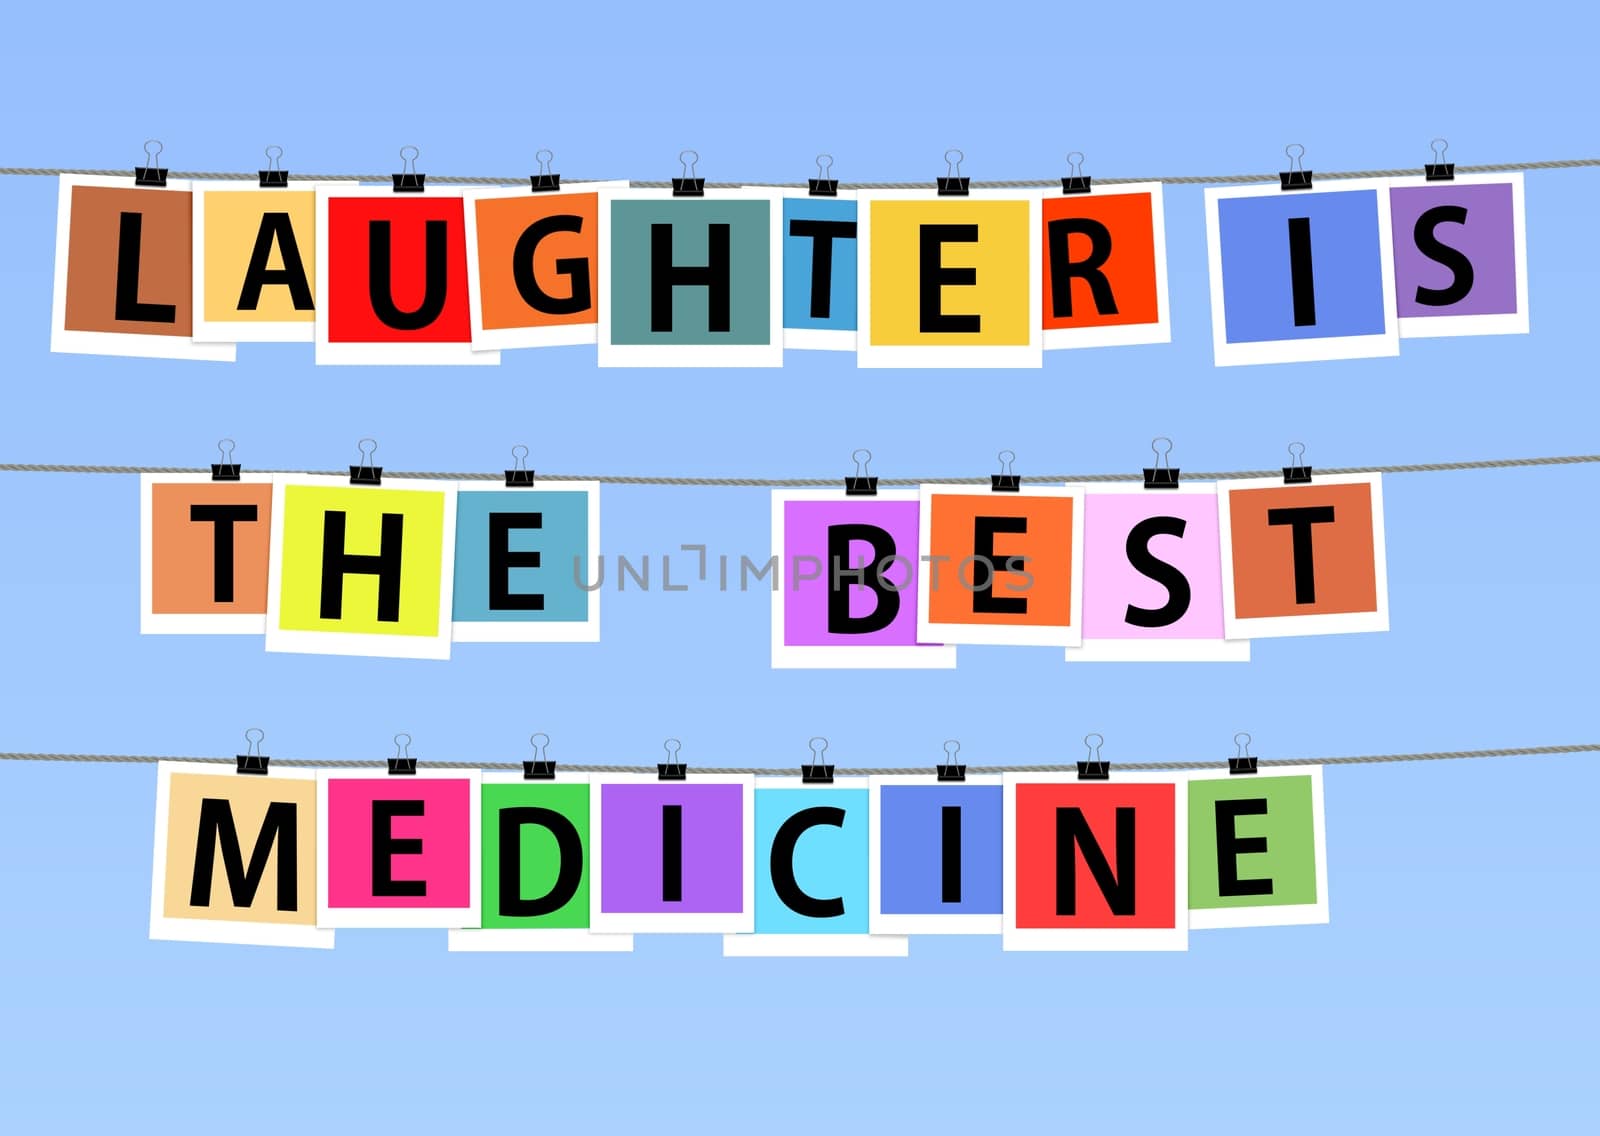 Laughter is the best medicine by darrenwhittingham